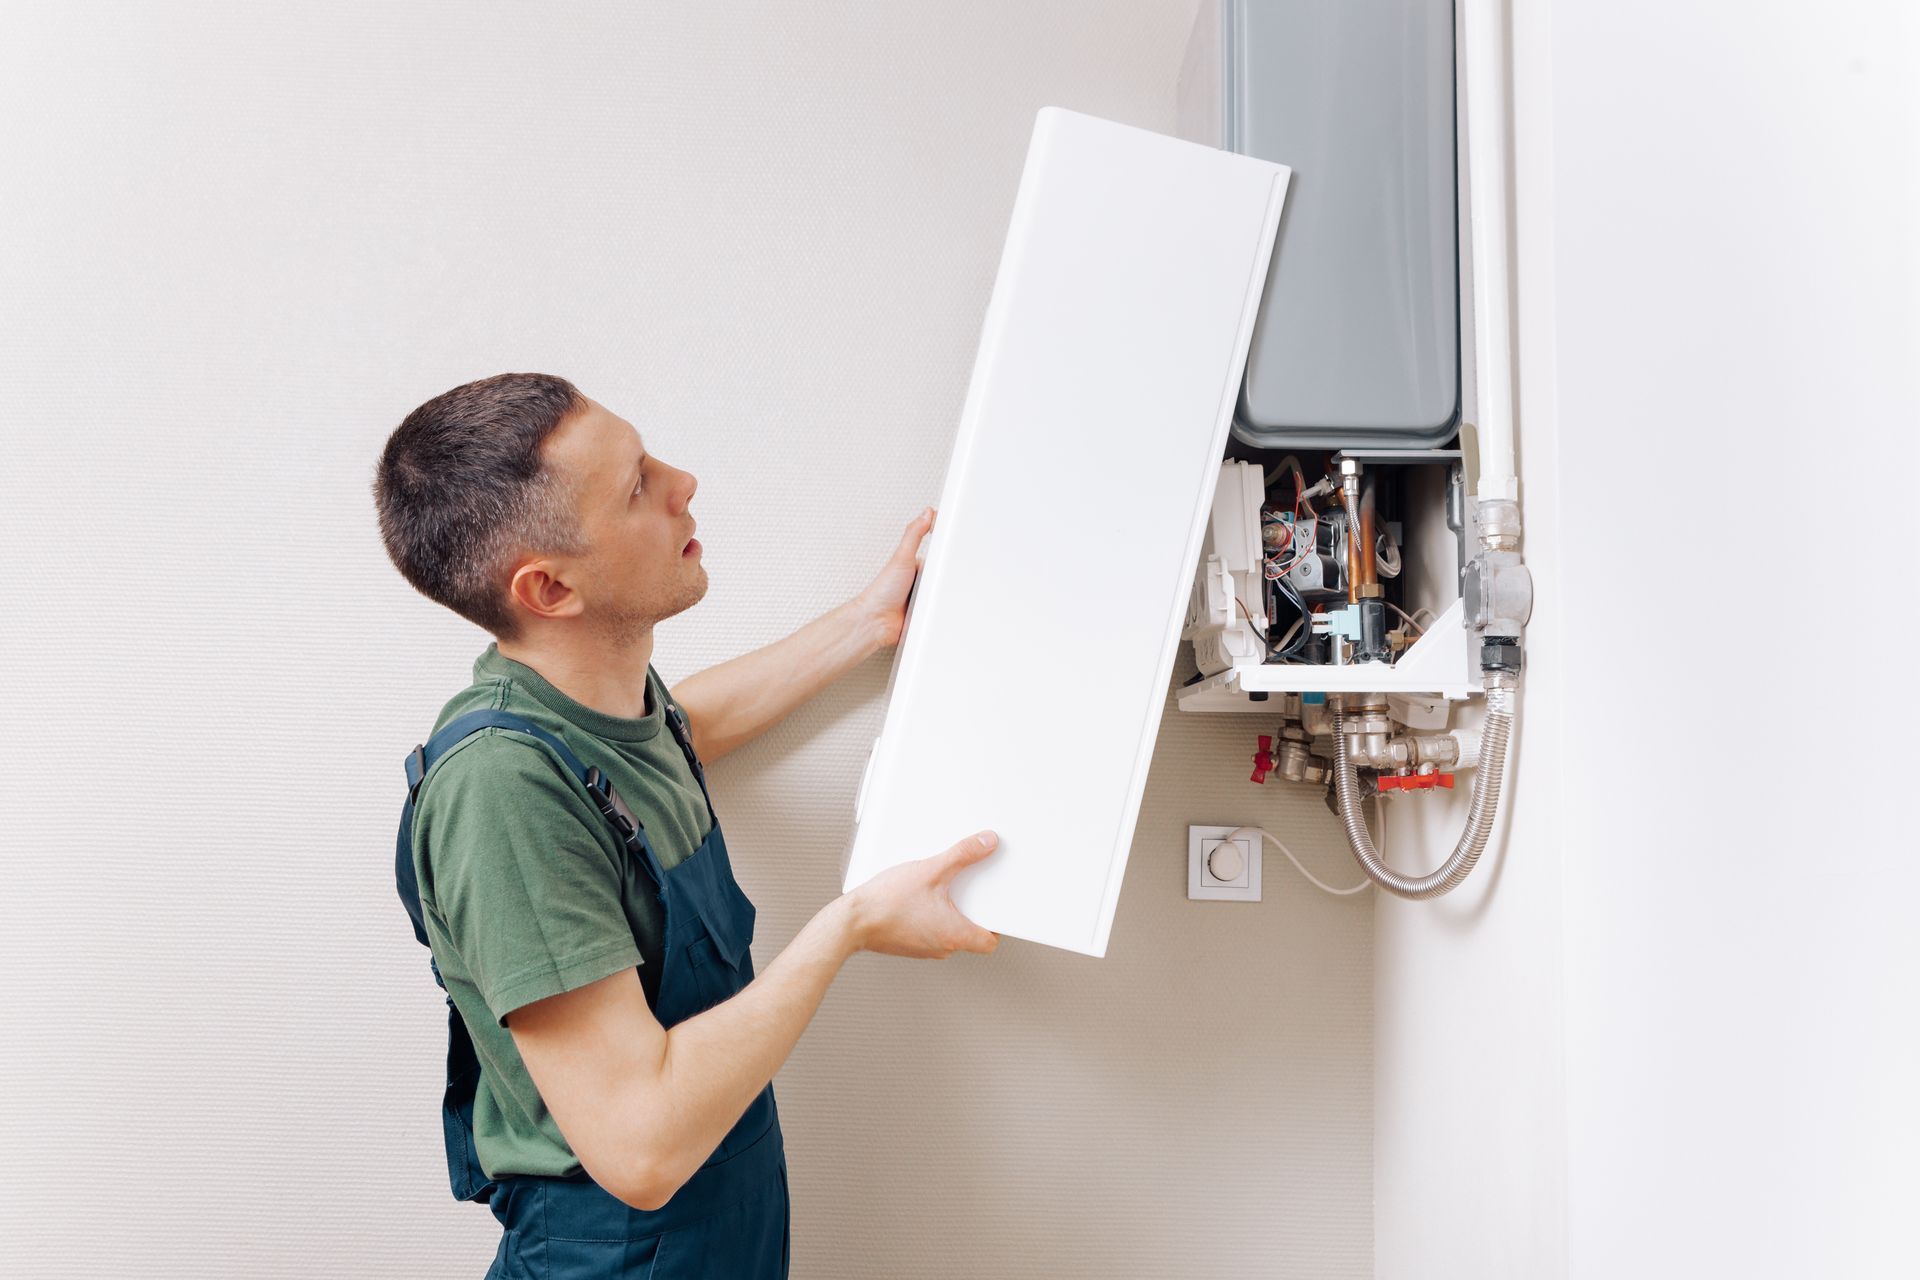 A man is holding a piece of paper in front of a water heater.